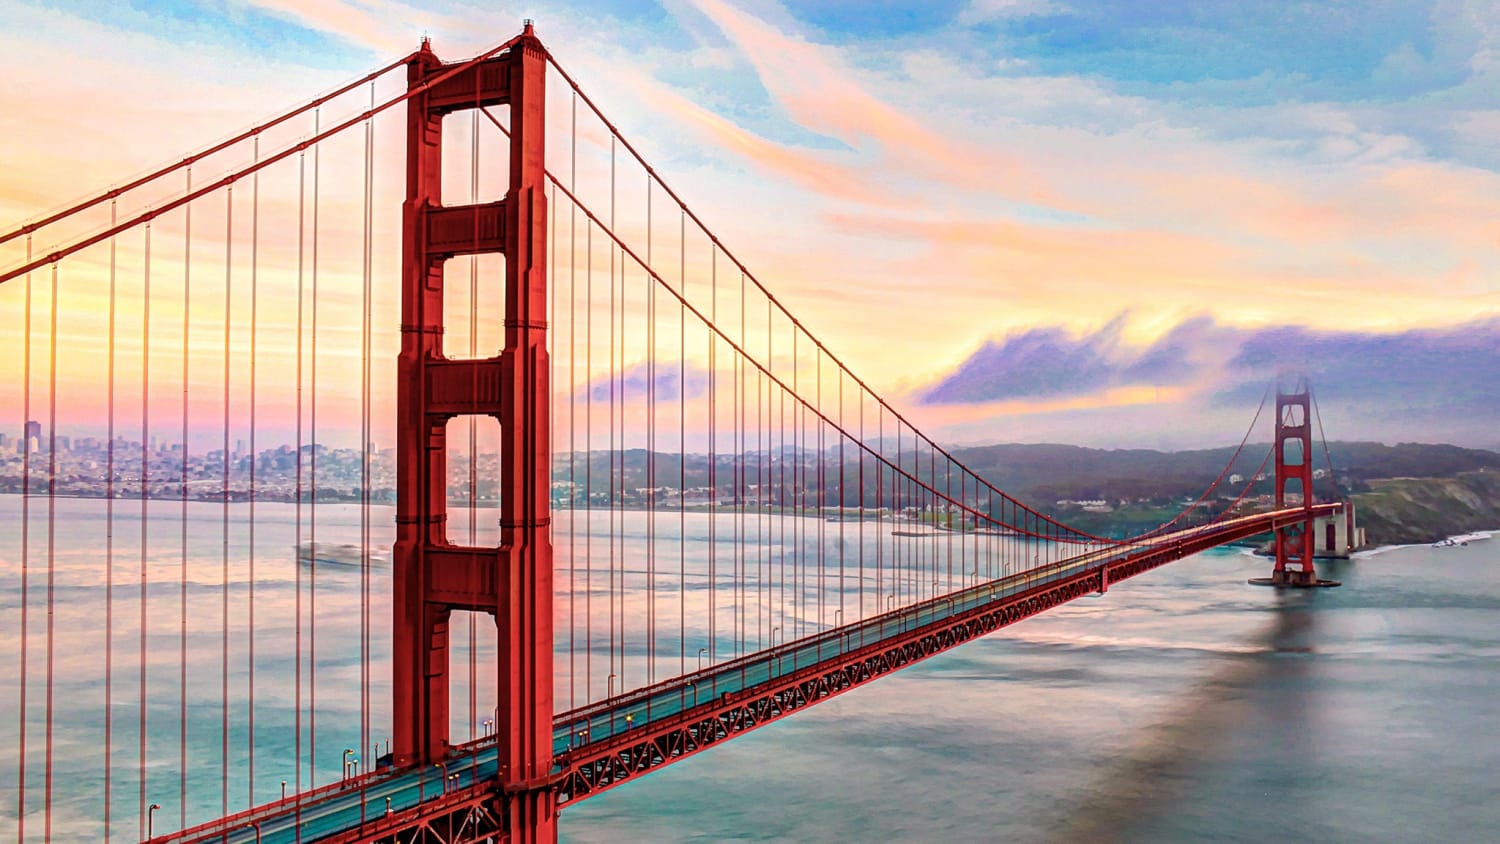 The 10 Most Beautiful Bridges in the World